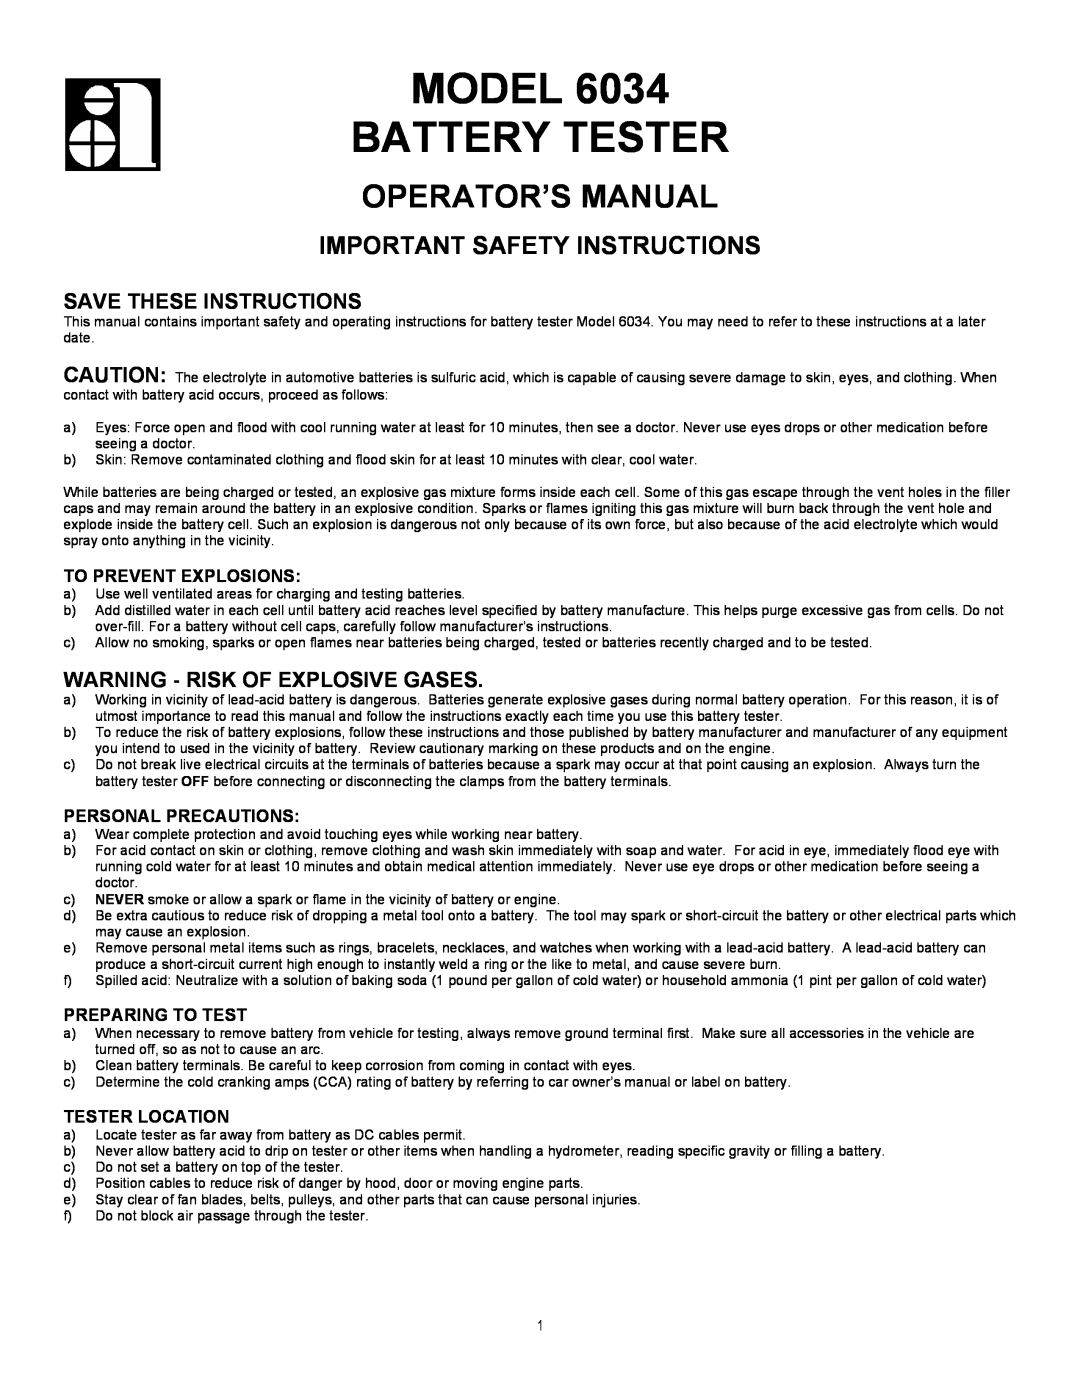 Associated Equipment 6034 important safety instructions To Prevent Explosions, Personal Precautions, Preparing To Test 